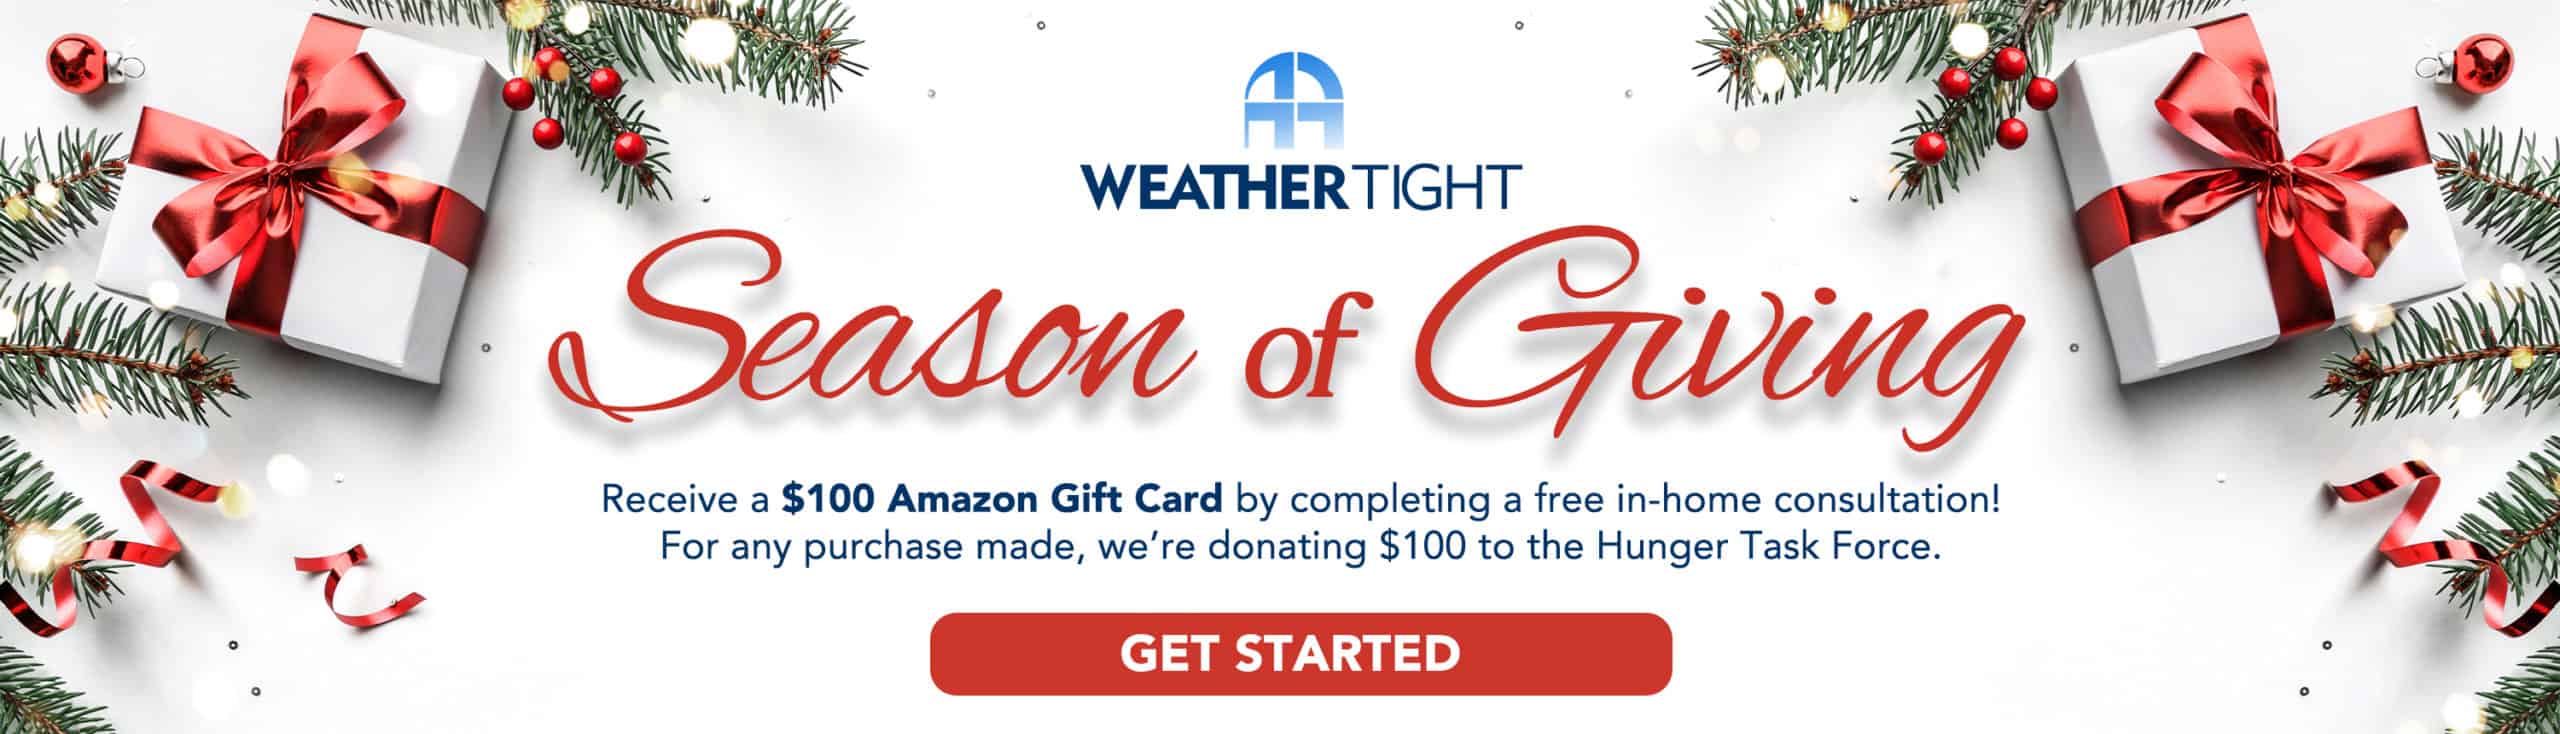 Weather Tight Corporation Season Of Giving Promo